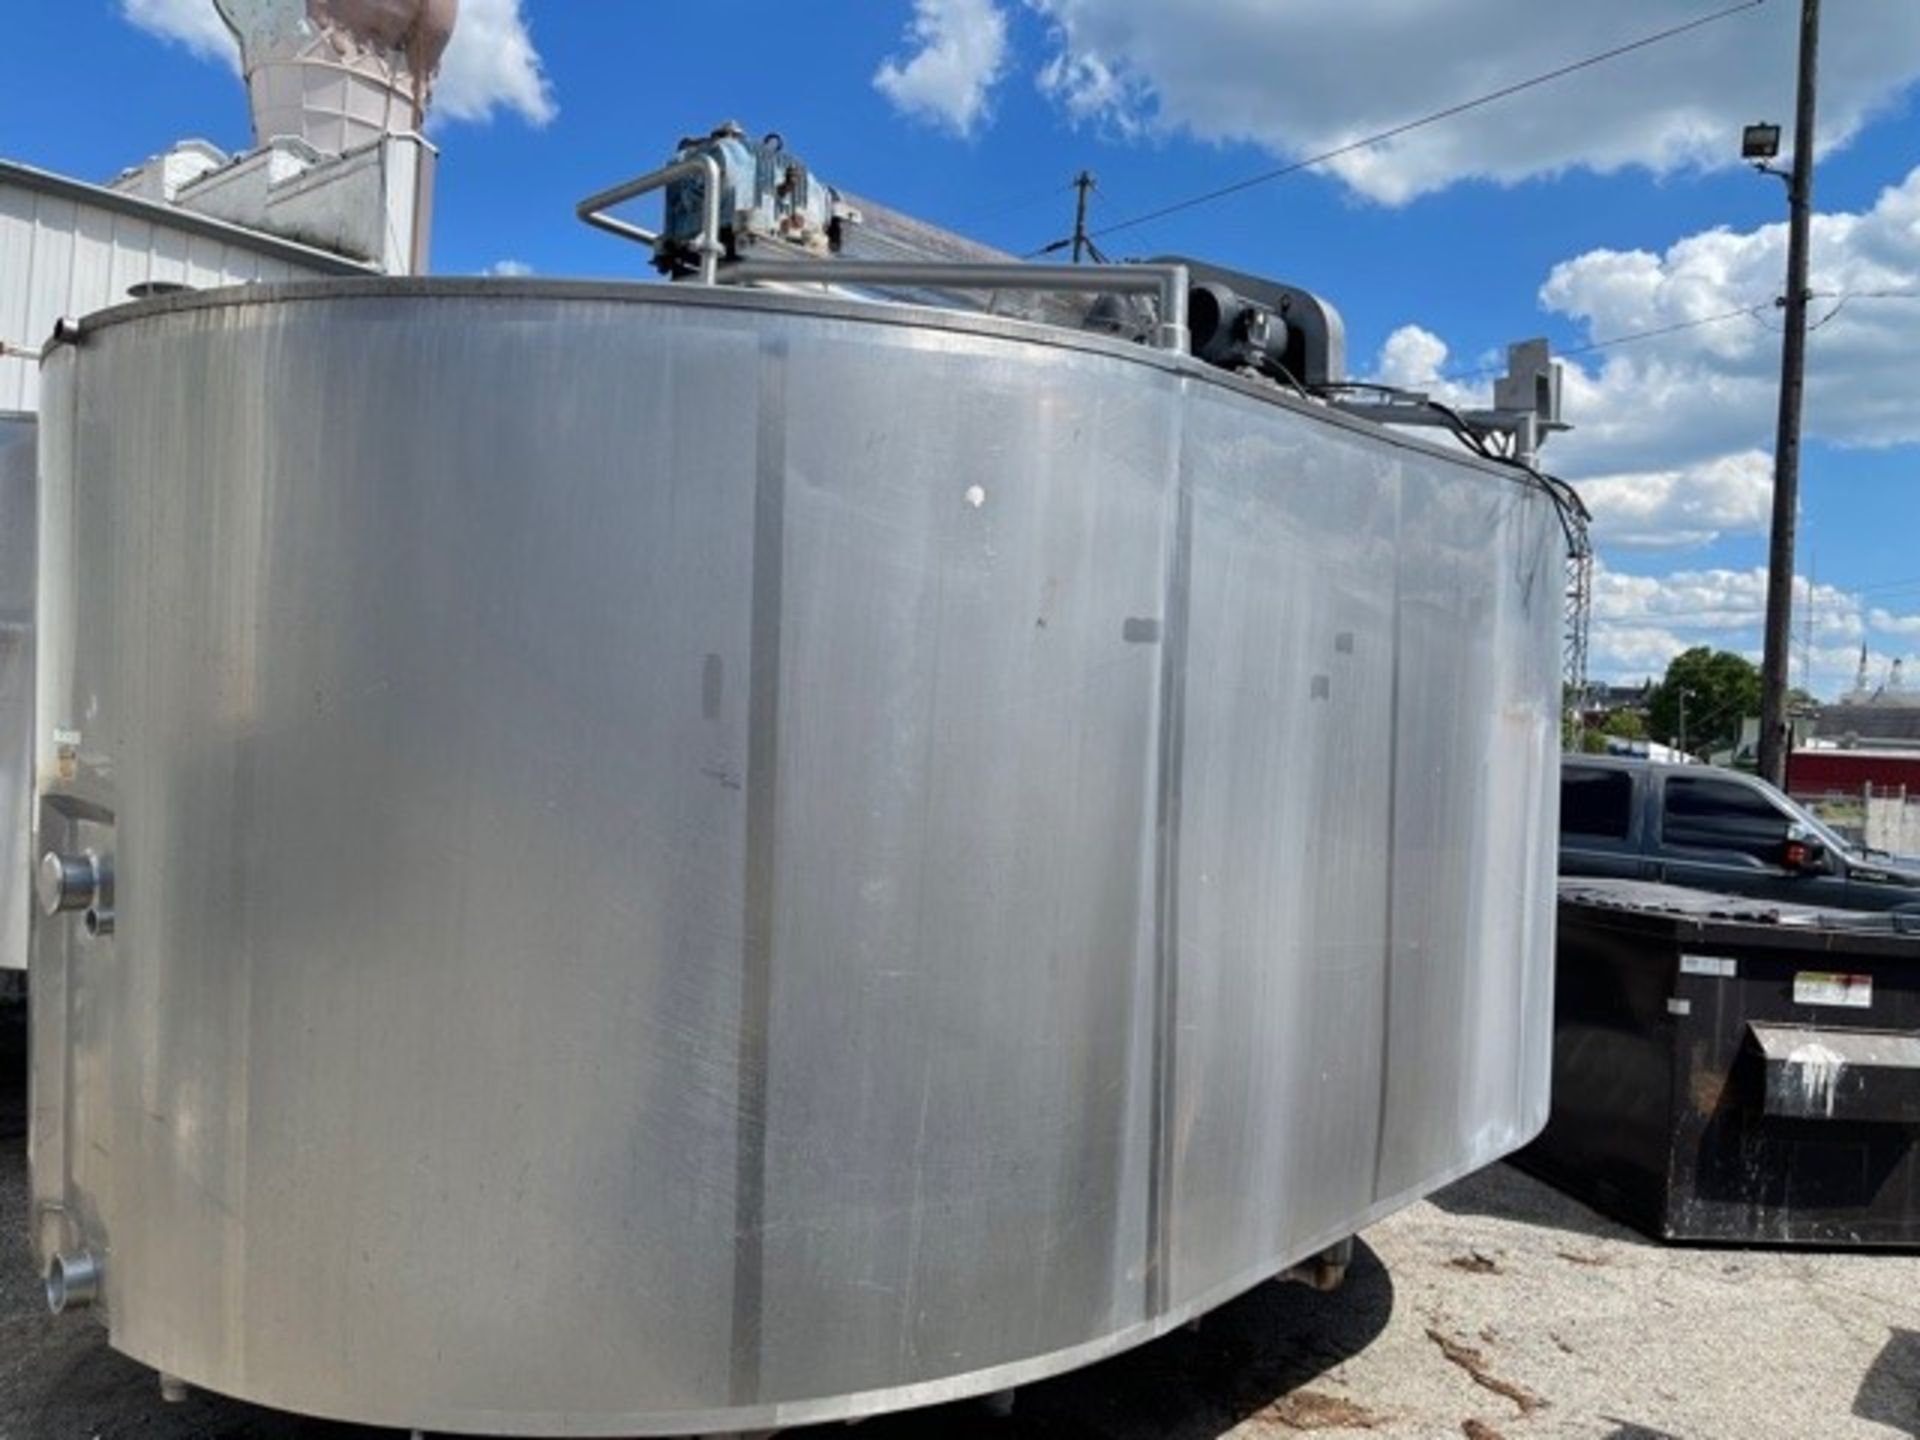 Aprox. 45,000 lb. Capacity Double O Vat, Dimensions Aprox. 12 ft. tall x 10 ft. wide x 16 ft.